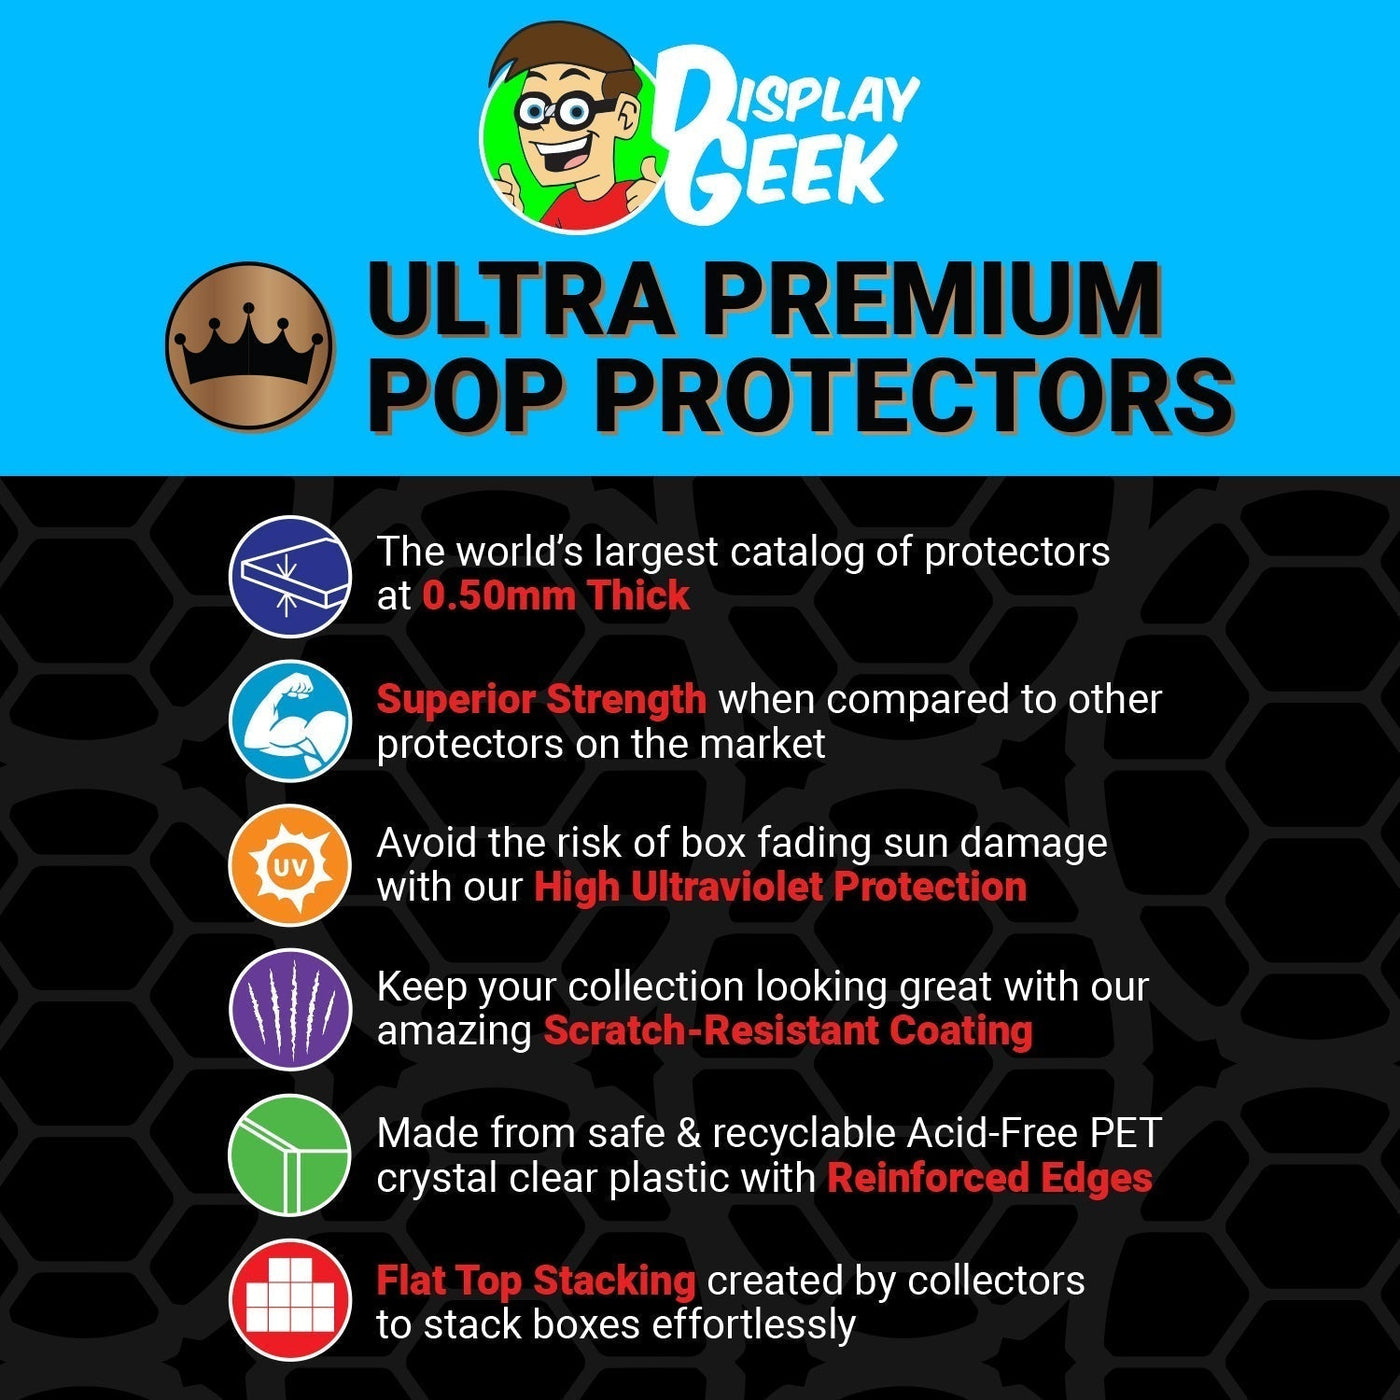 Pop Protector for Ryomen Sukuna #1116 Funko Pop Deluxe on The Protector Guide App by Display Geek